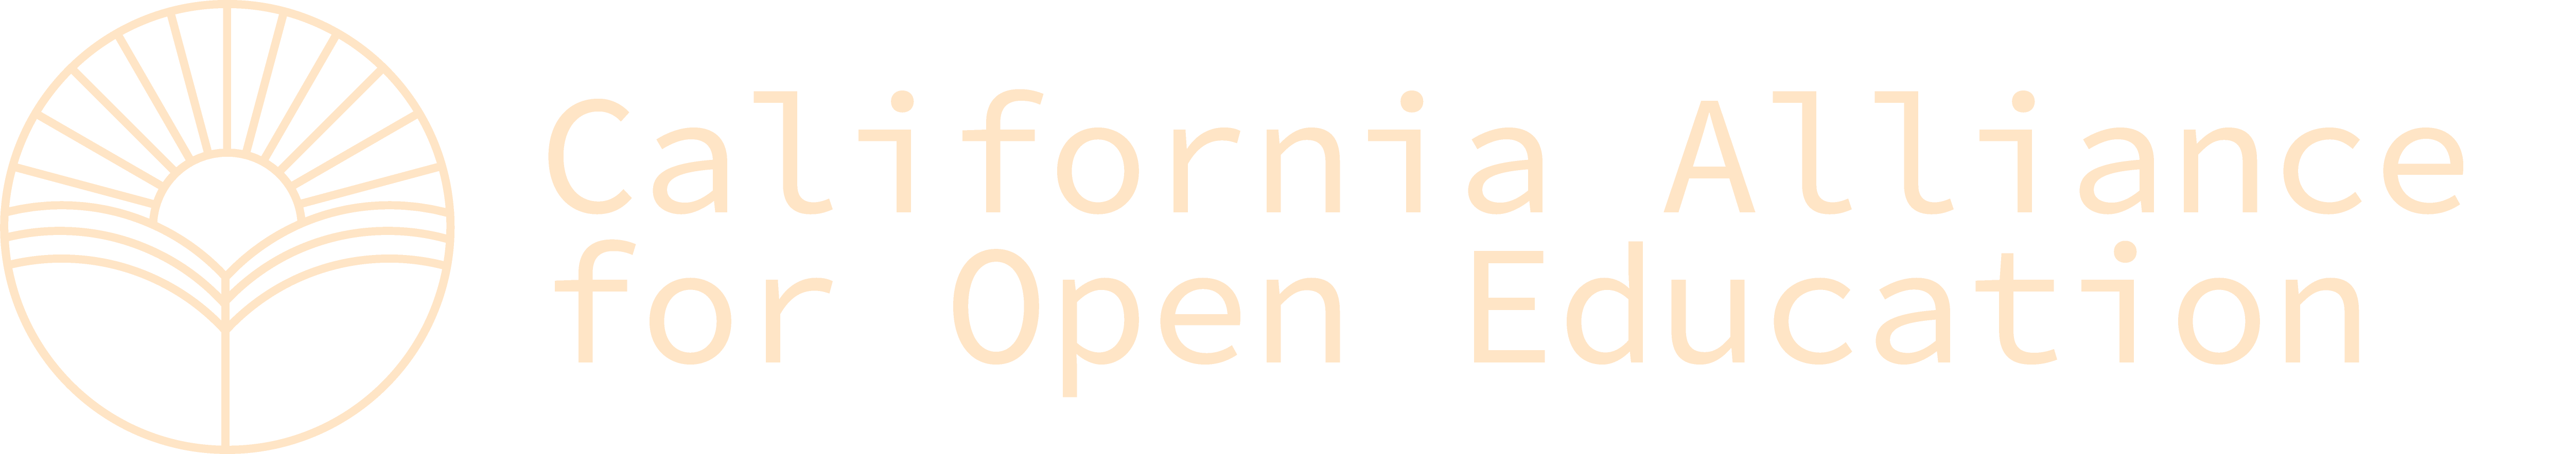 The California Alliance for Open Education